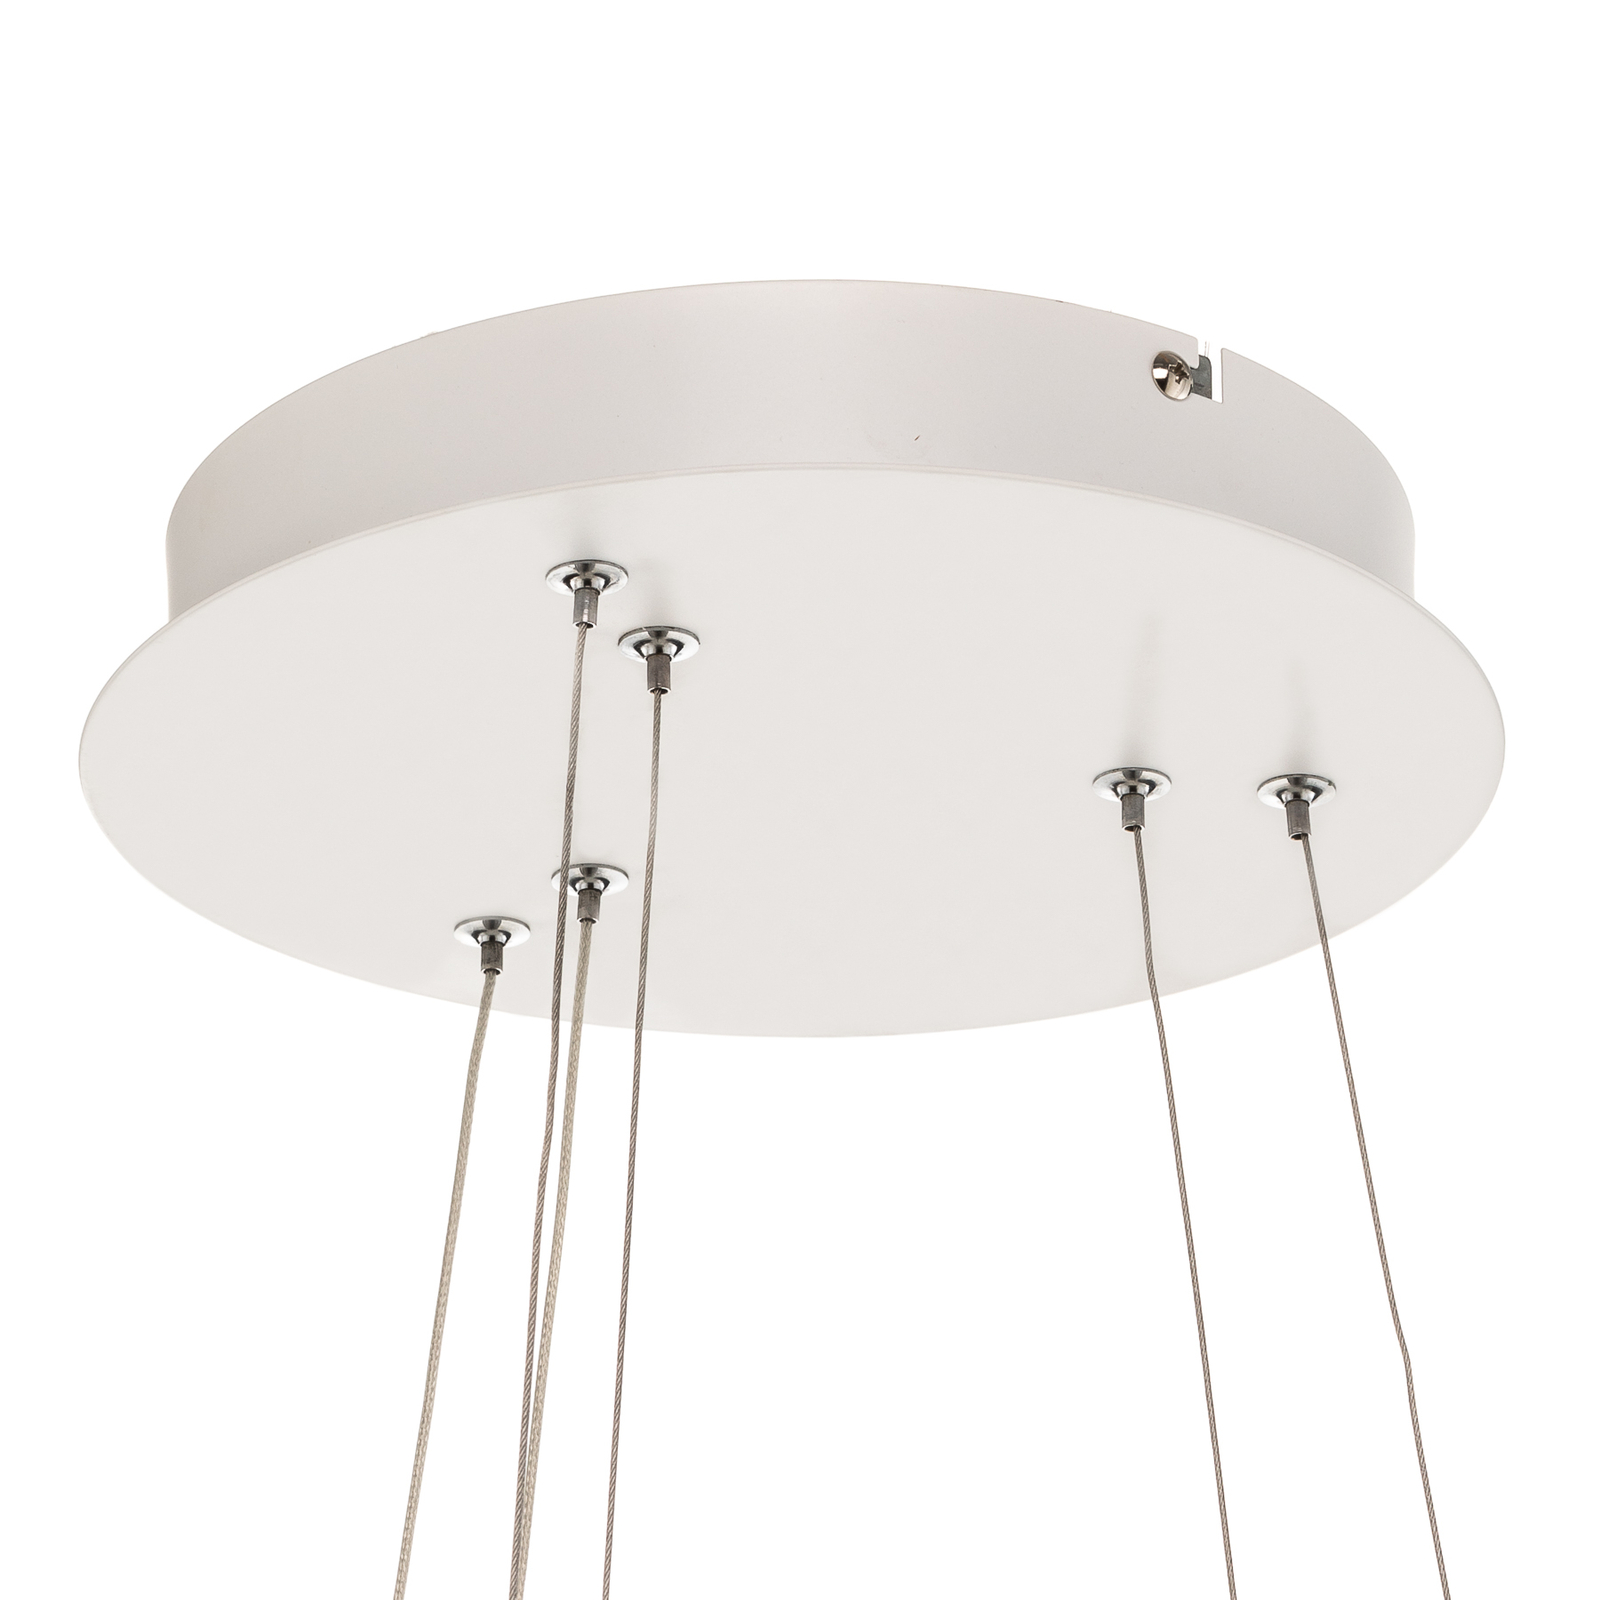 Suspension LED Giotto, à 2 lampes, blanche